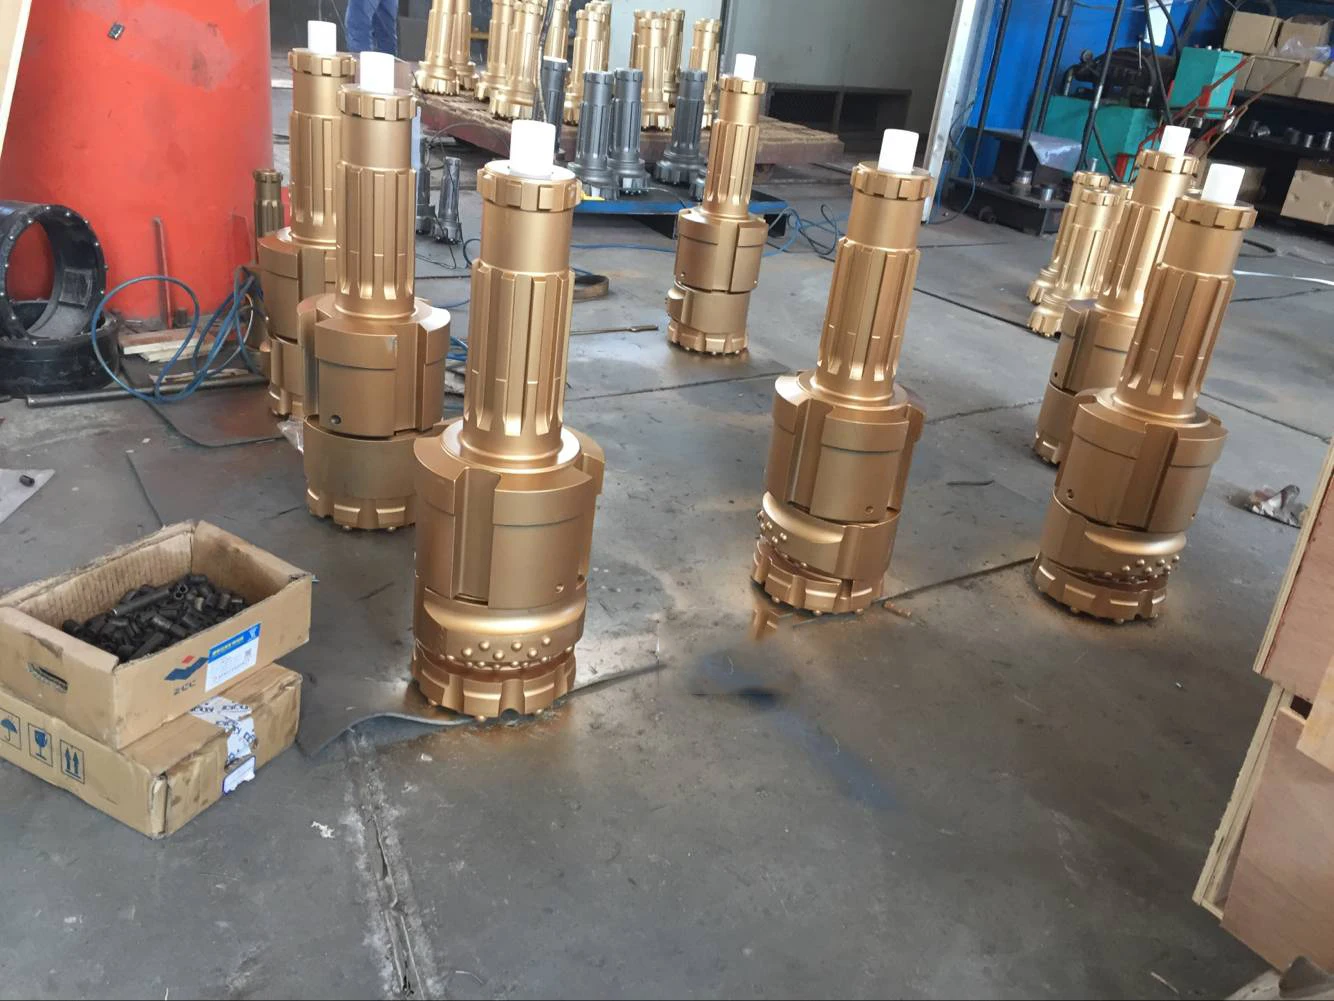 Hot selling outer Diameter of casing Tube 108-273 mm Eccentric casing system with Three pieces